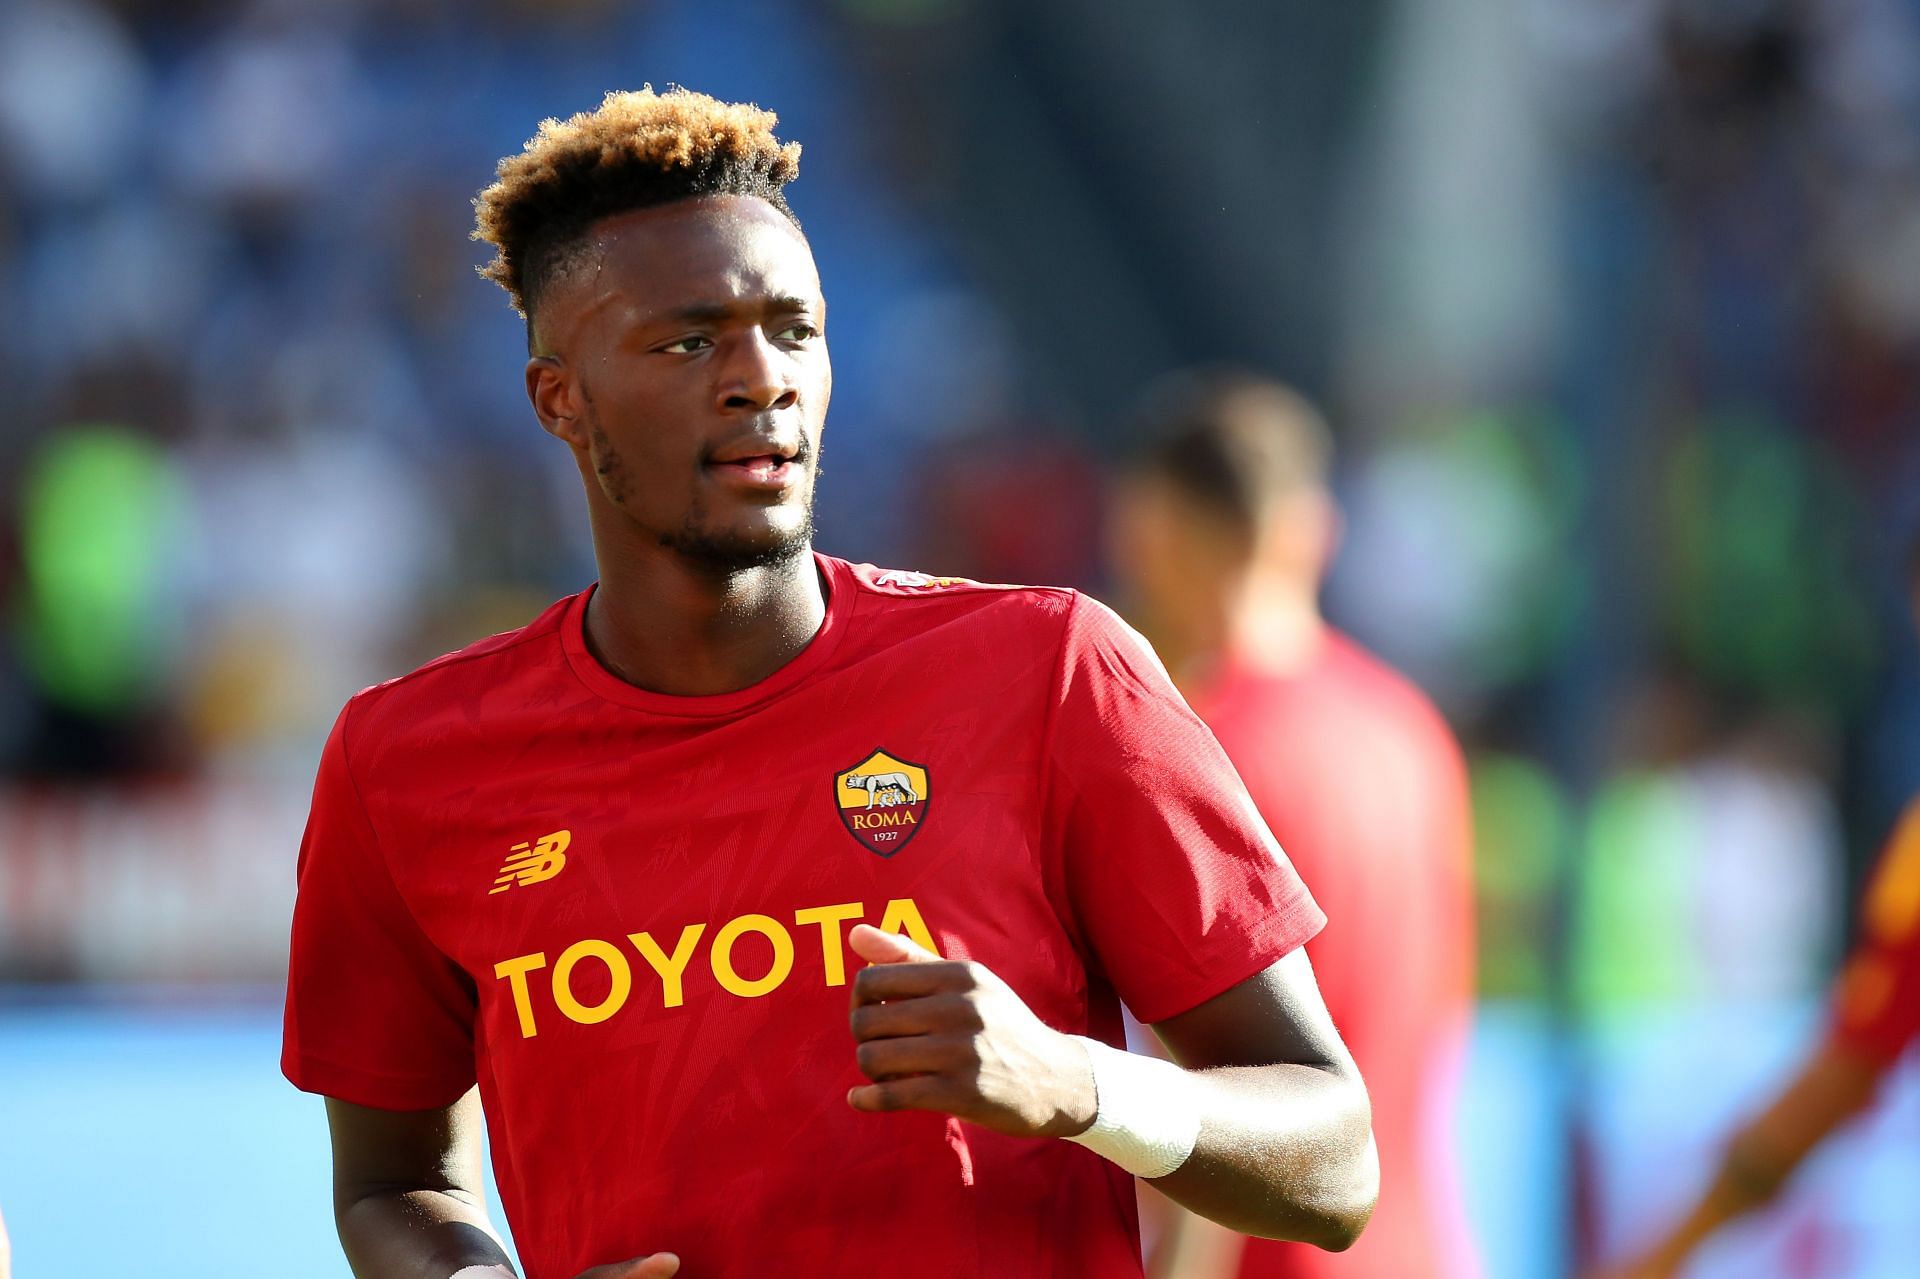 Tammy Abraham has scored 32 goals in 75 appearances for AS Roma.